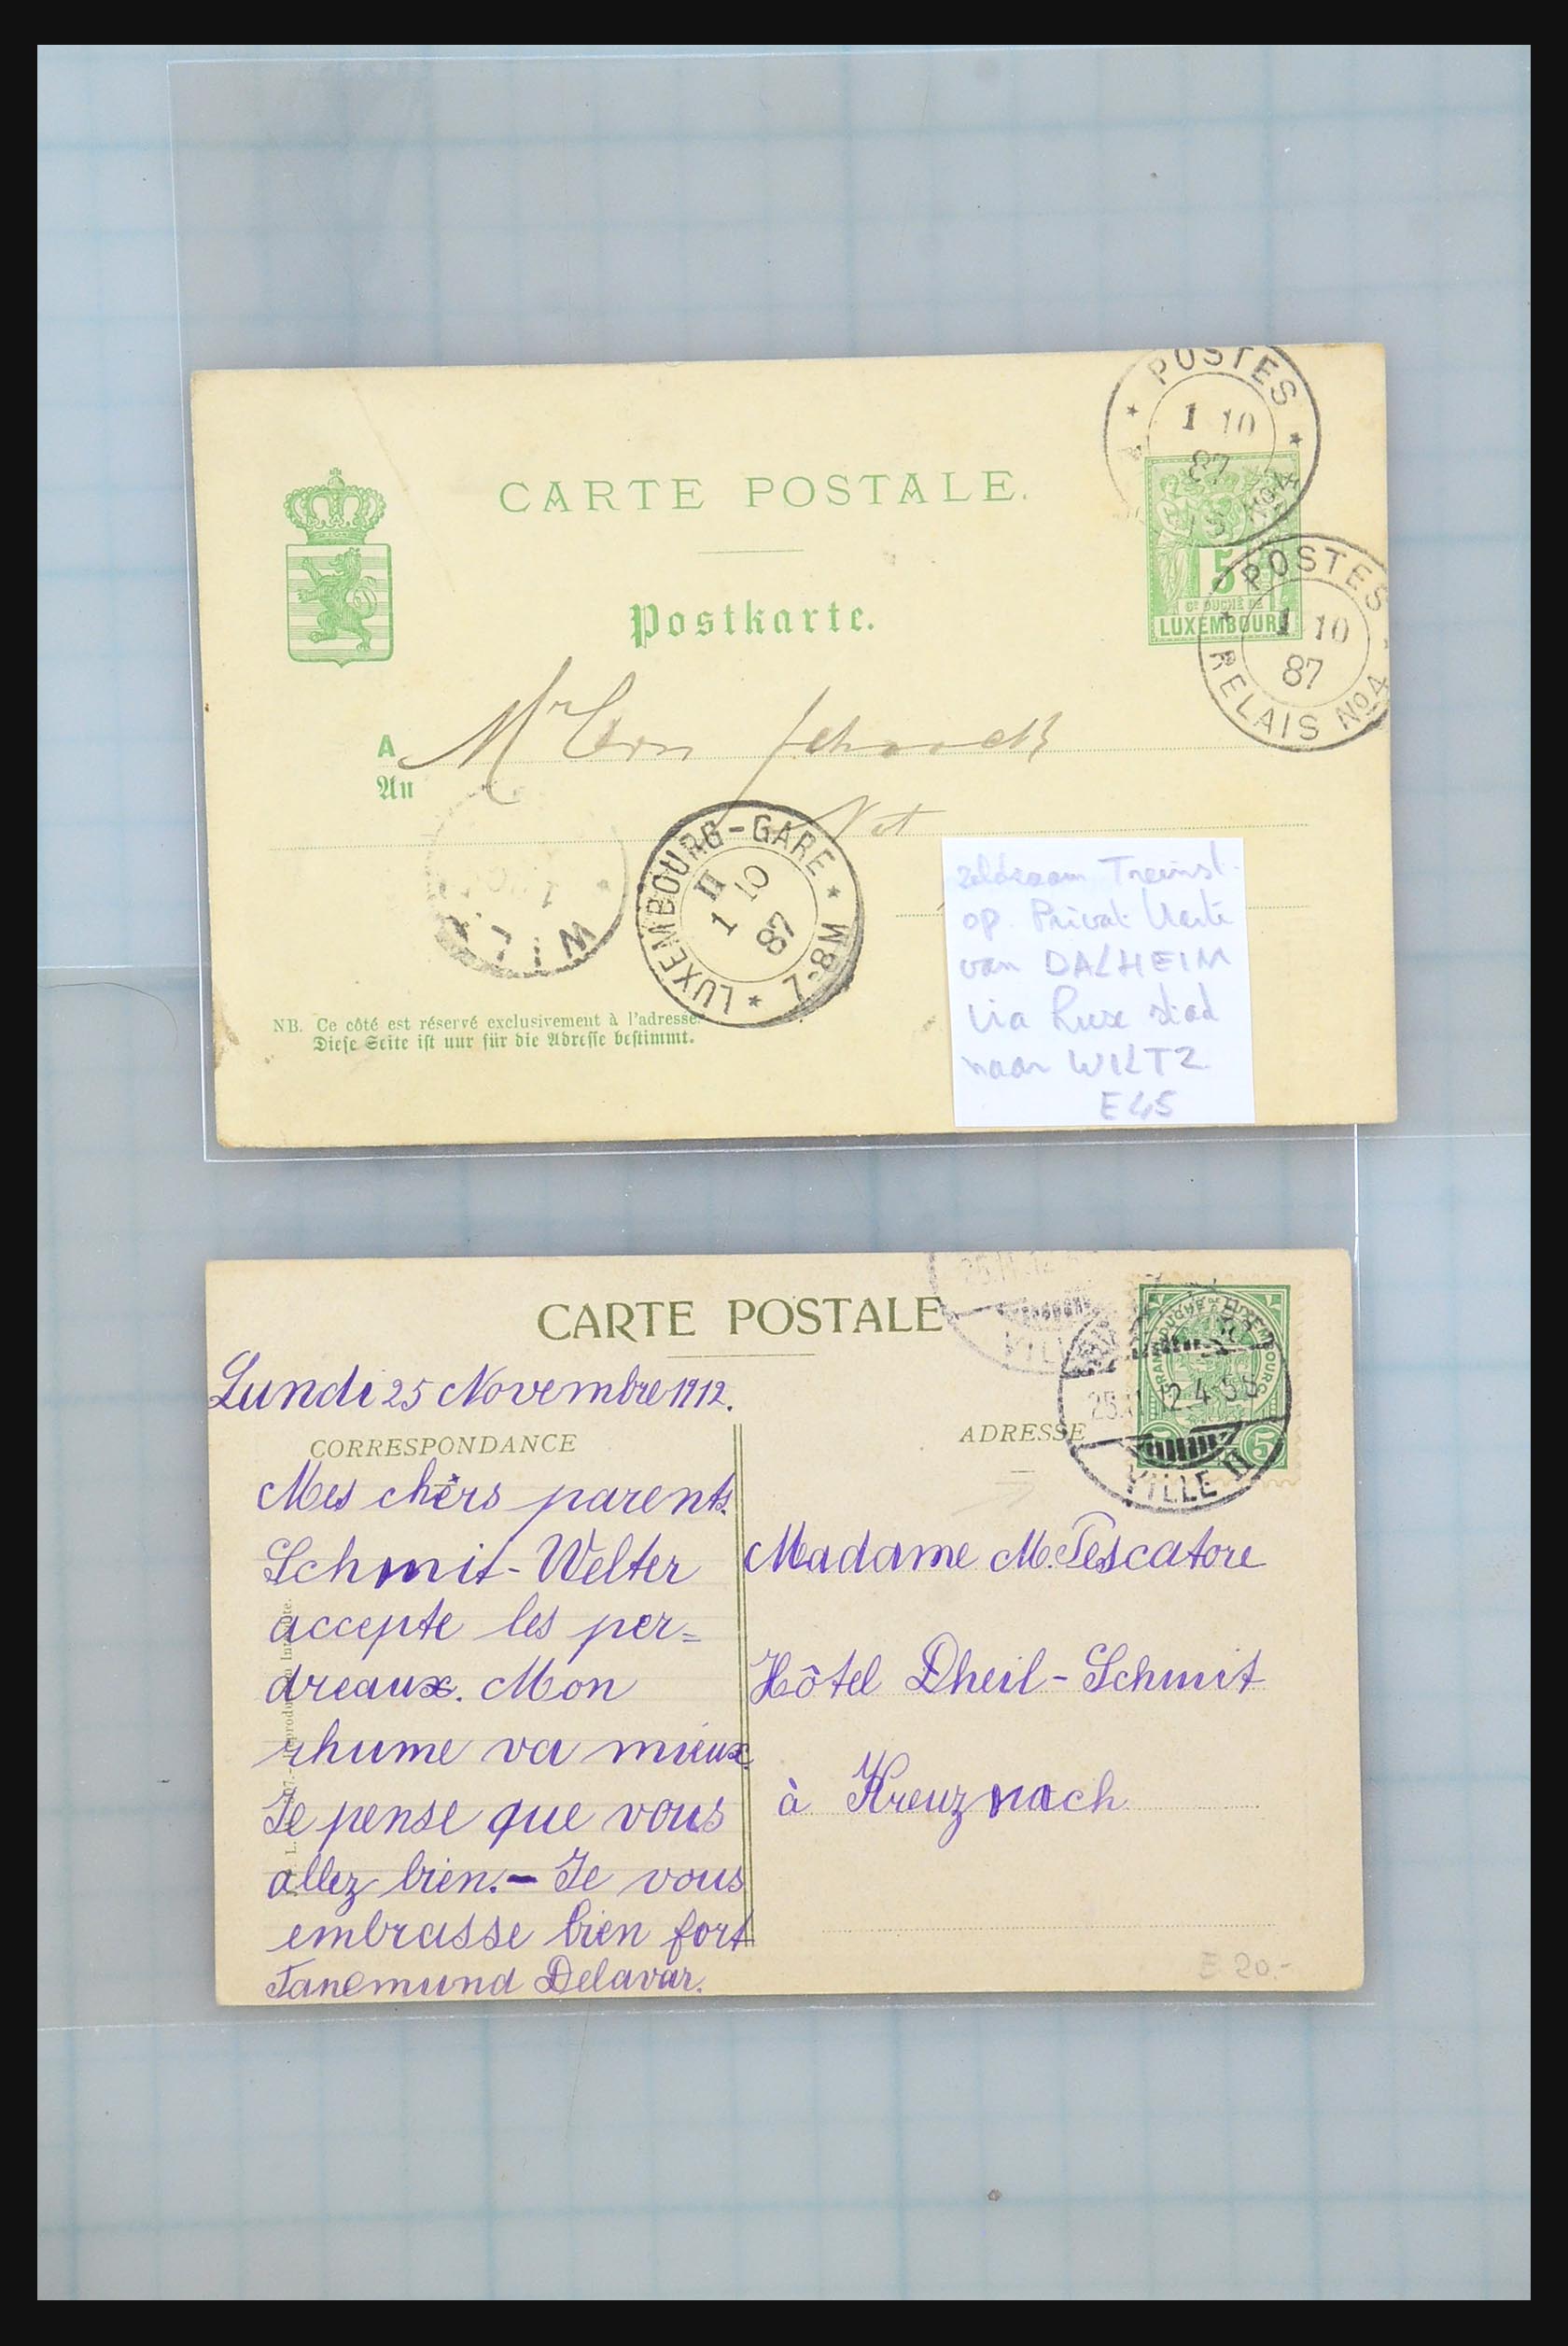 31358 068 - 31358 Portugal/Luxemburg/Greece covers 1880-1960.